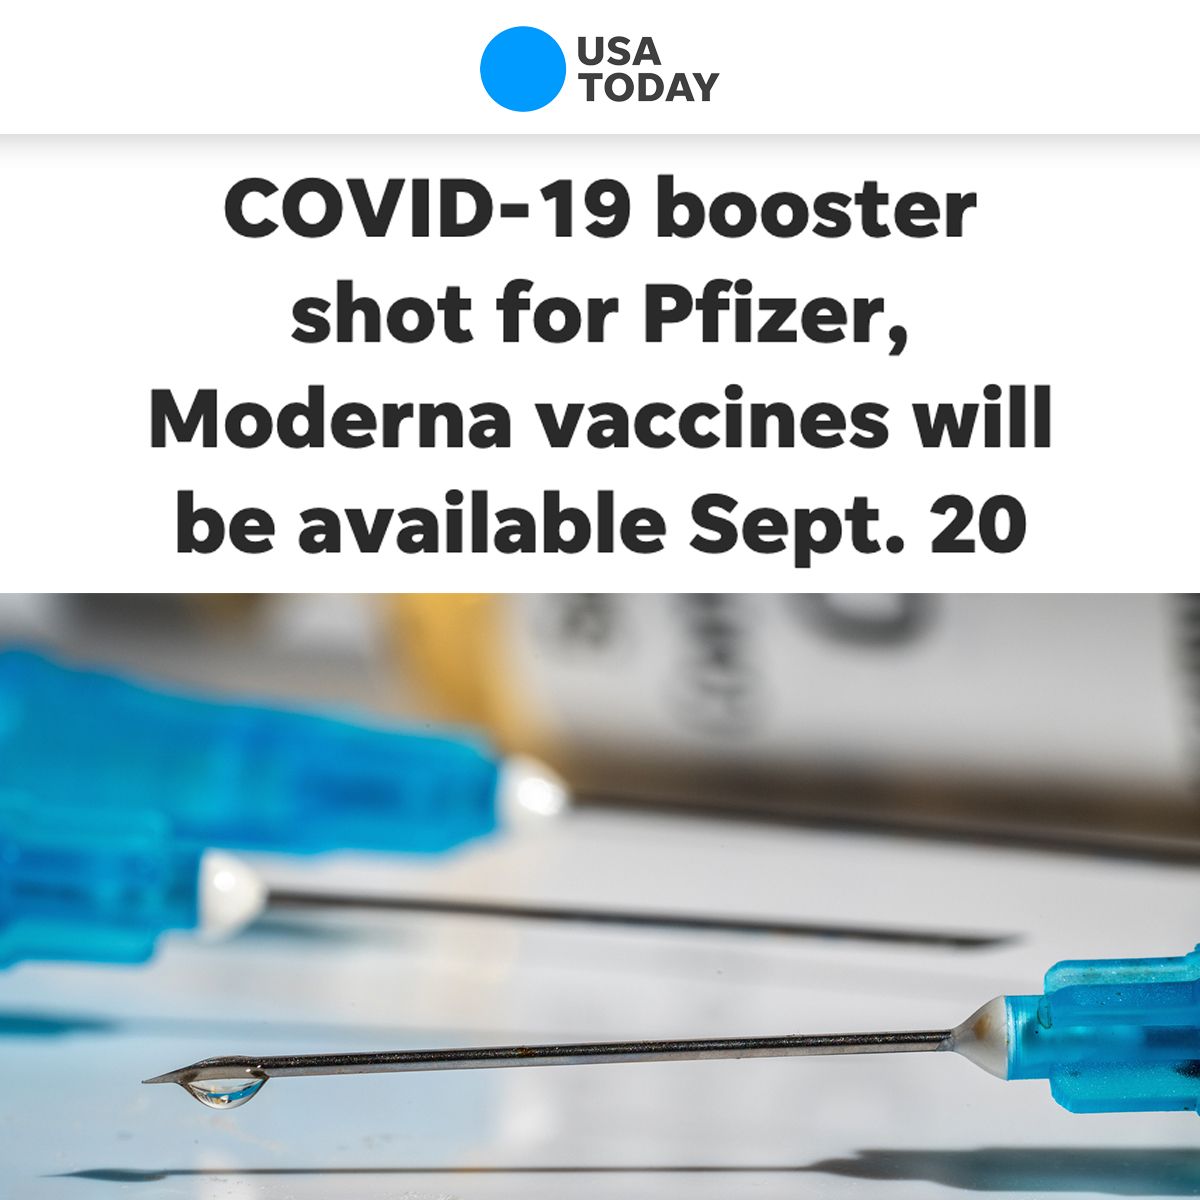 U.S. Officials Will Make COVID-19 Booster Shots Available by Sep. 20